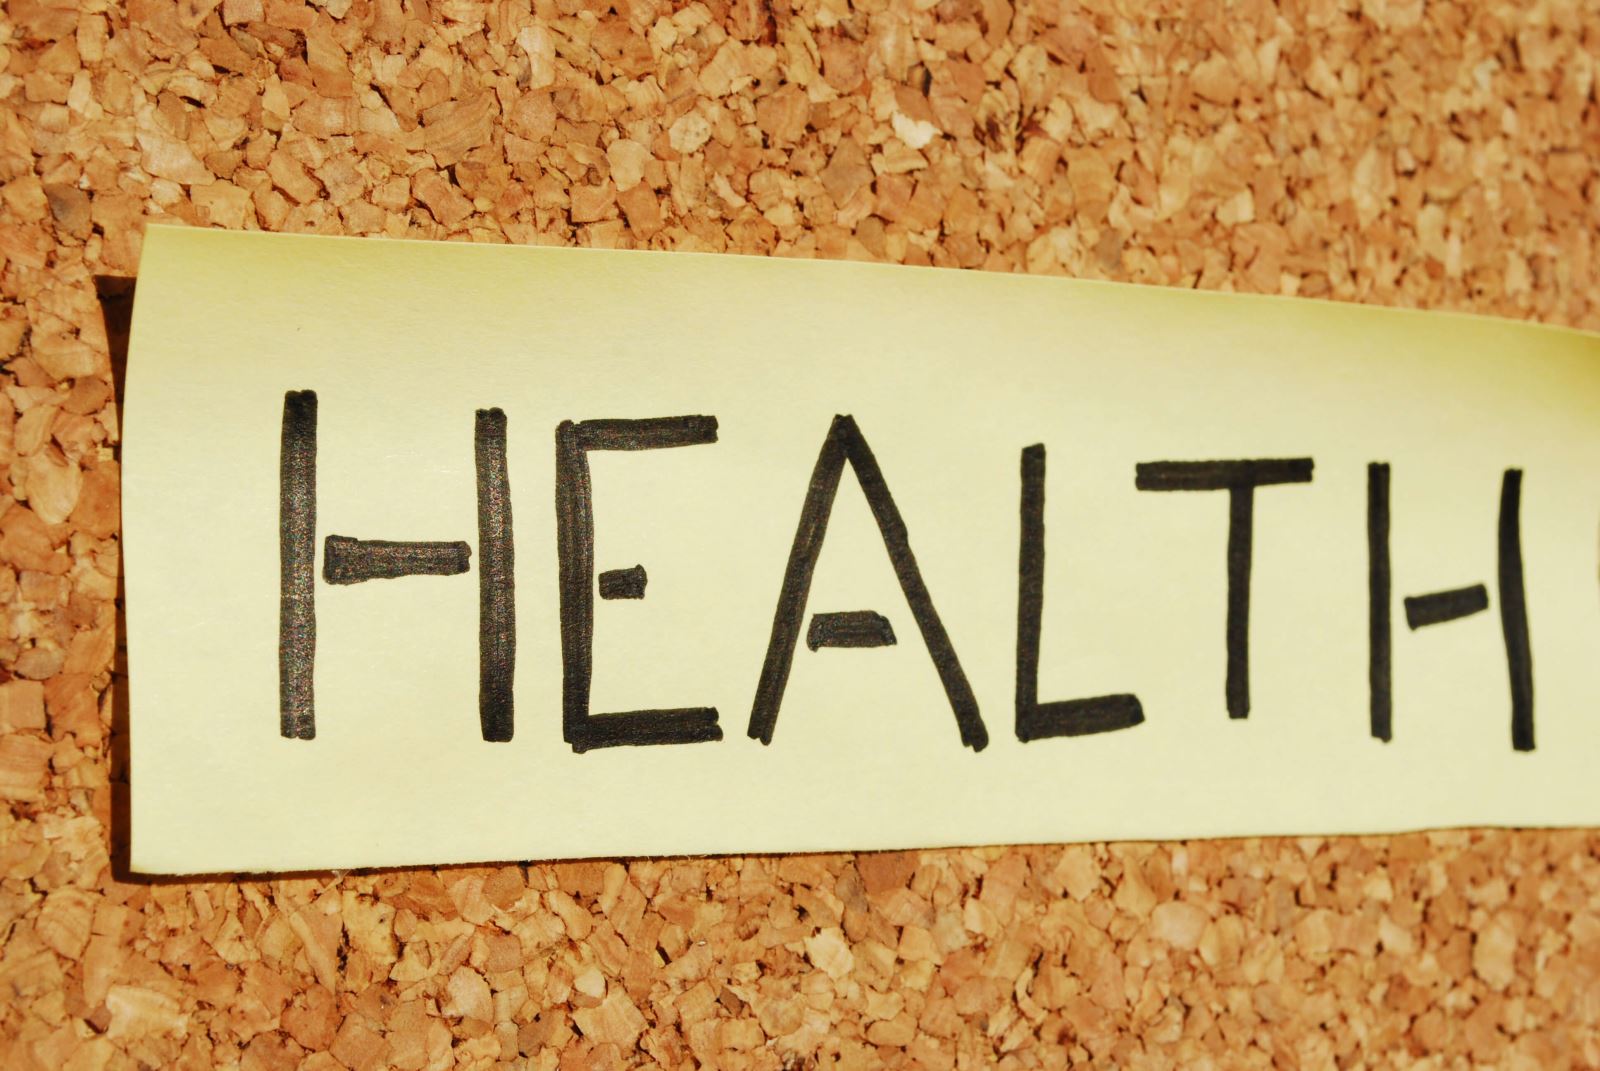 Stock photo with text "Health" written on a post-it note. 